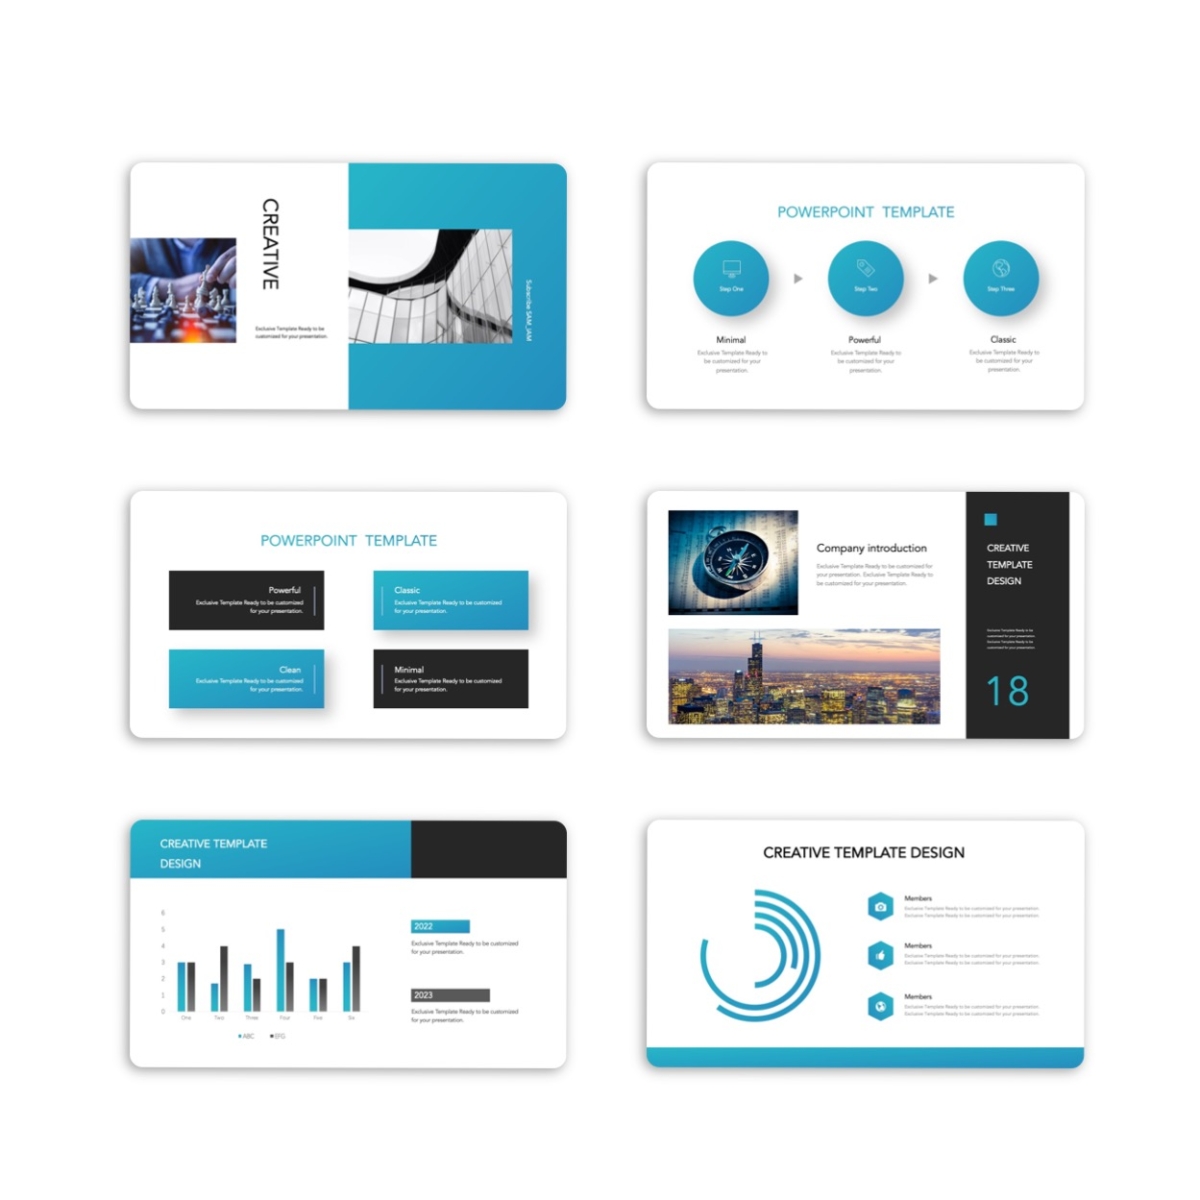 Business and Creative Agency Presentation Template